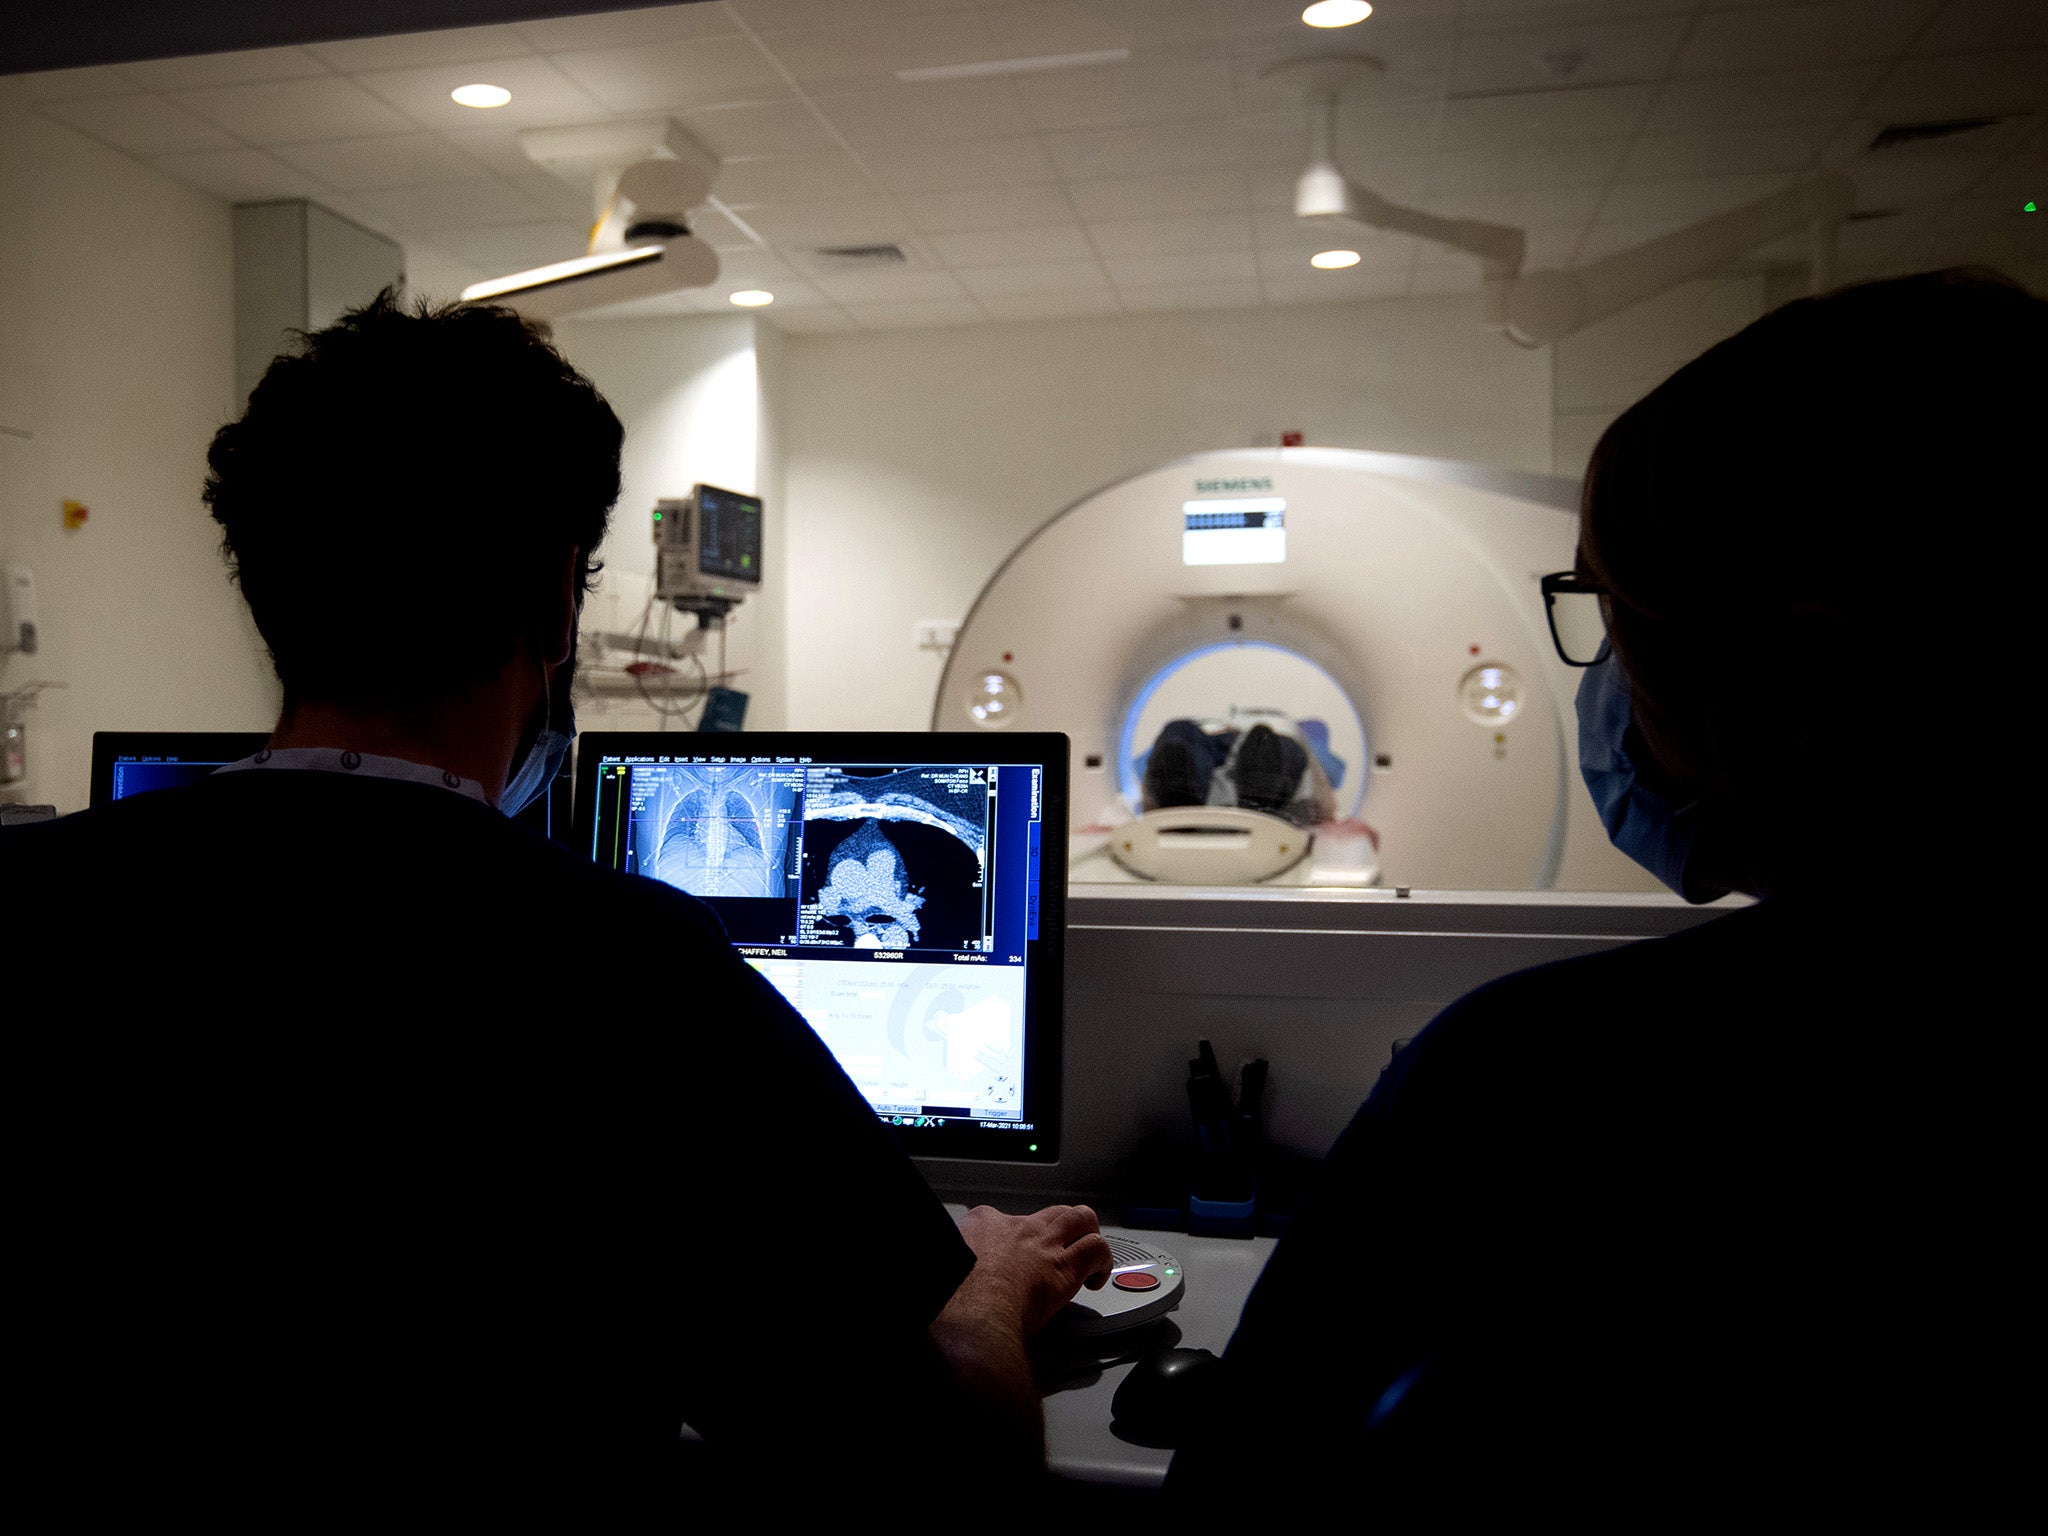 Patients waiting for scan results are unable to obtain them because of a rise in emergencies and fewer staff, says one radiologist